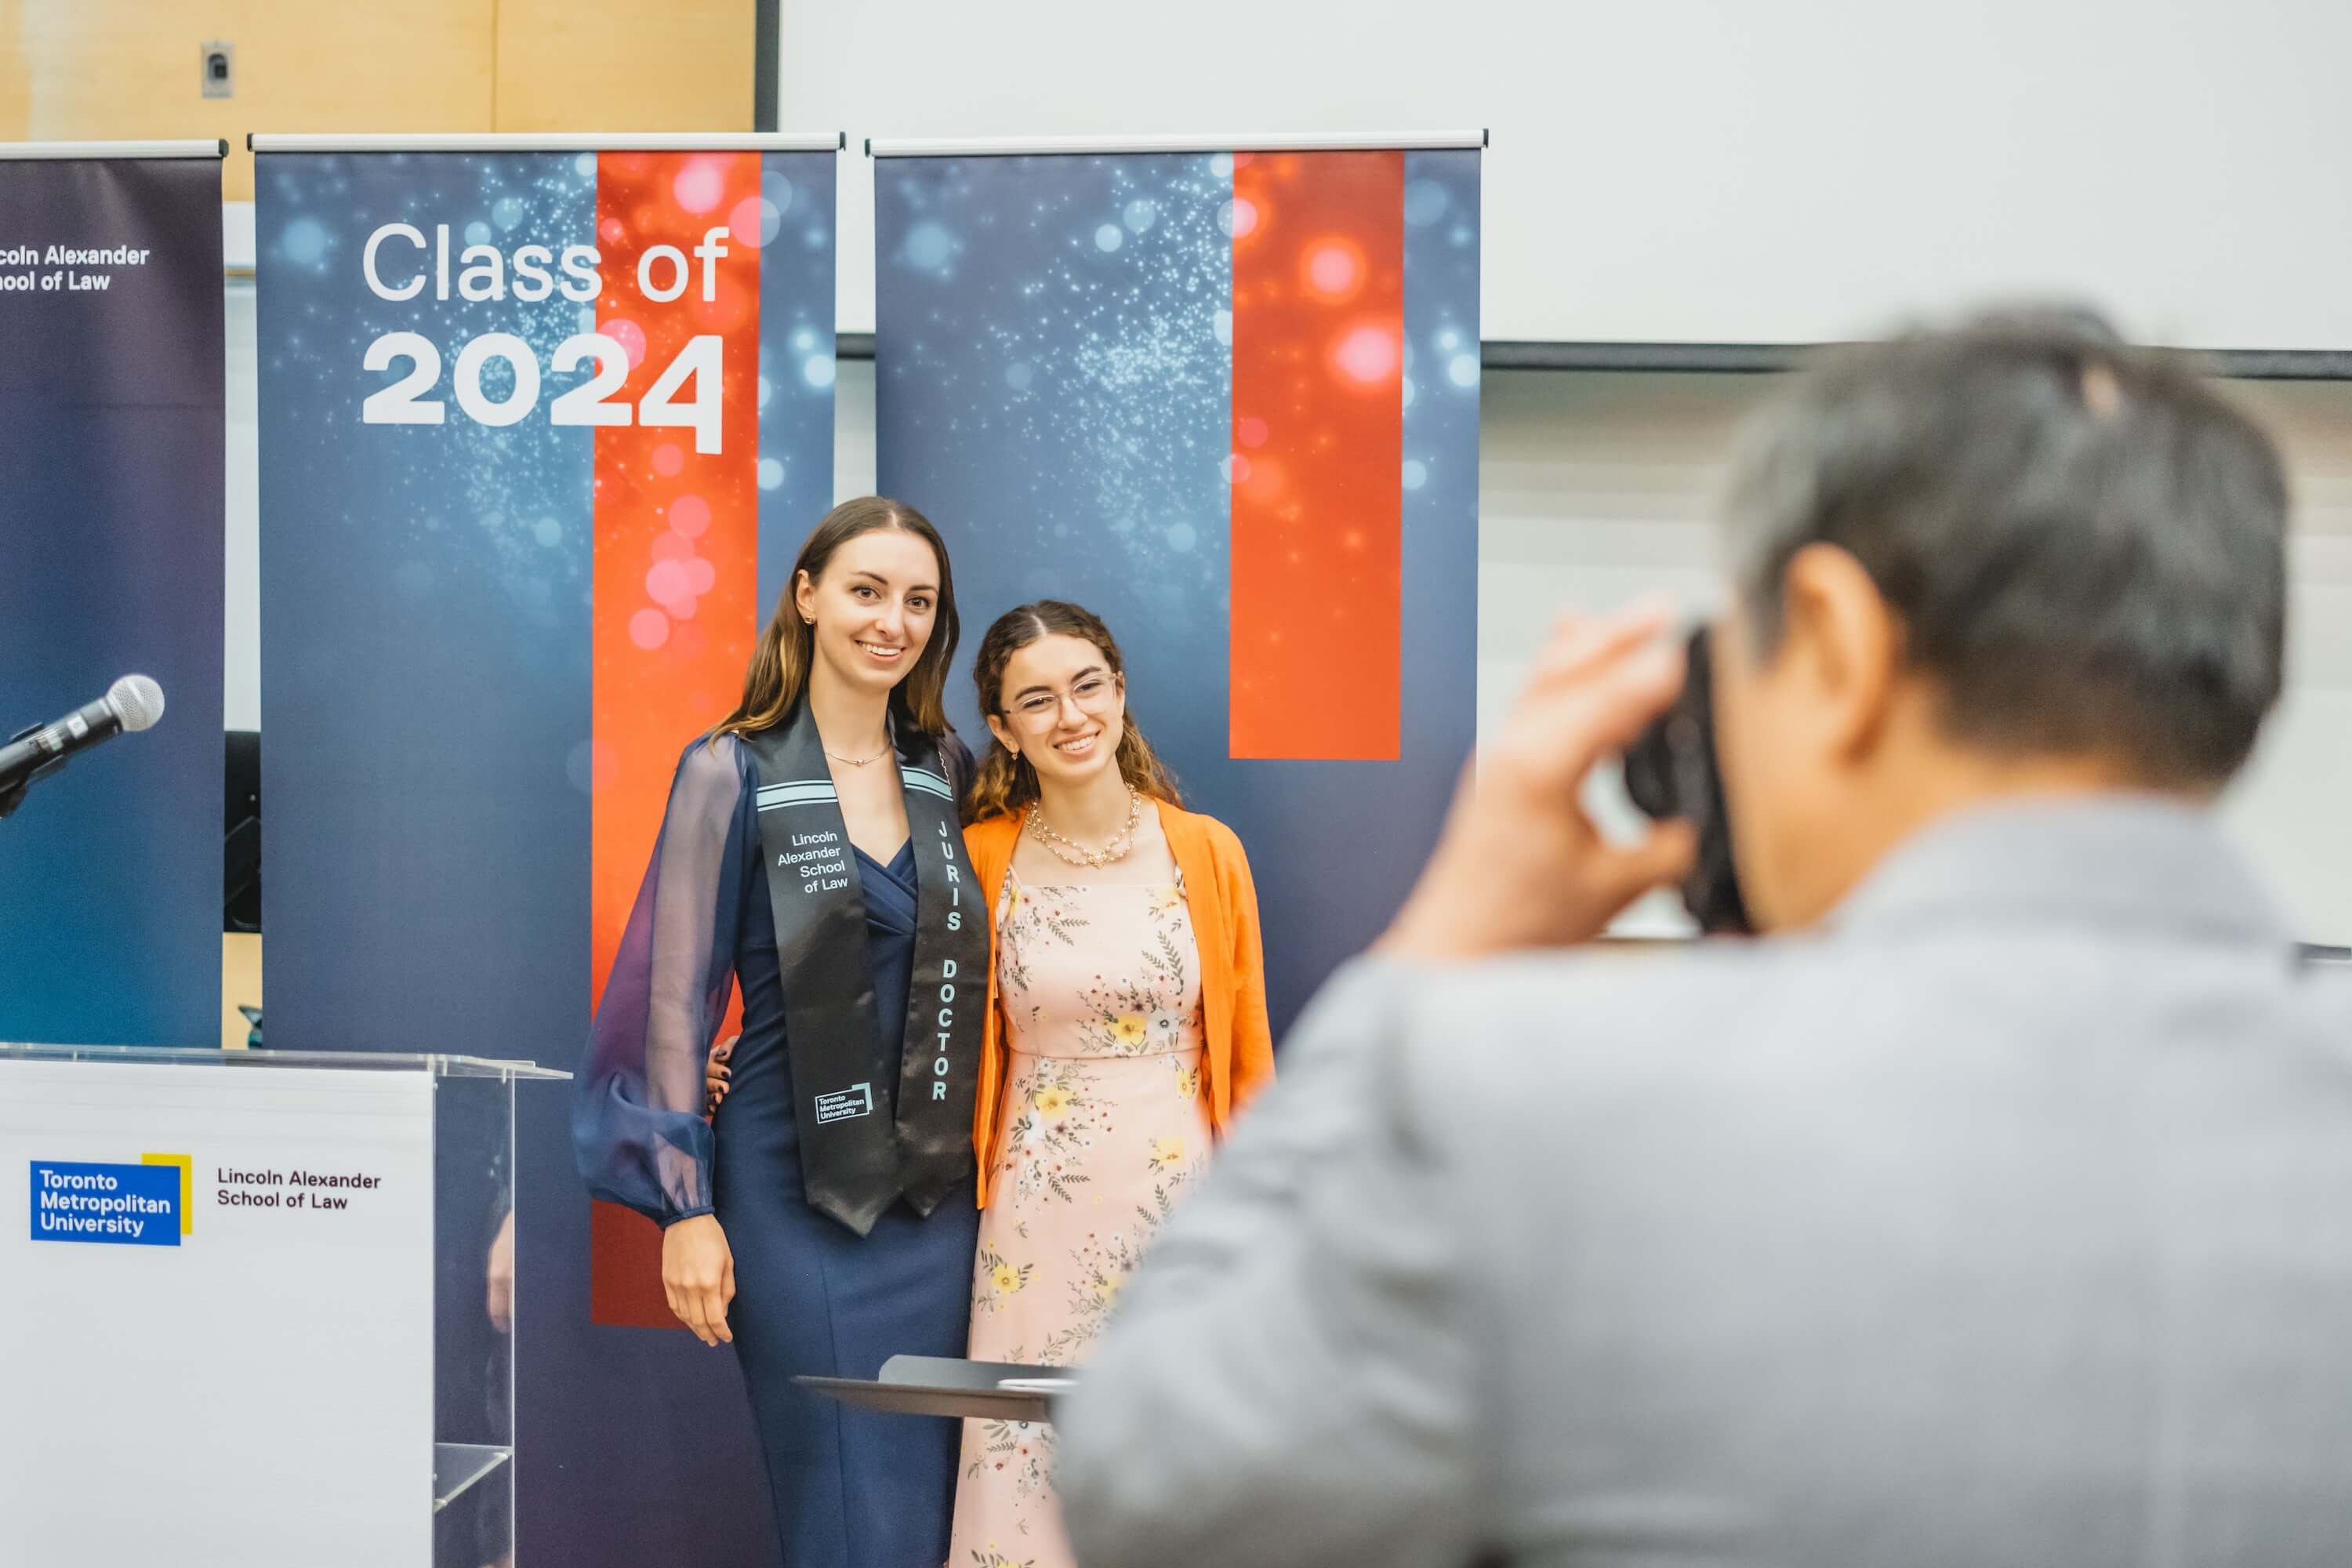 Two young women pose in front of a "Class of 2024" banner while an older man takes their photo.